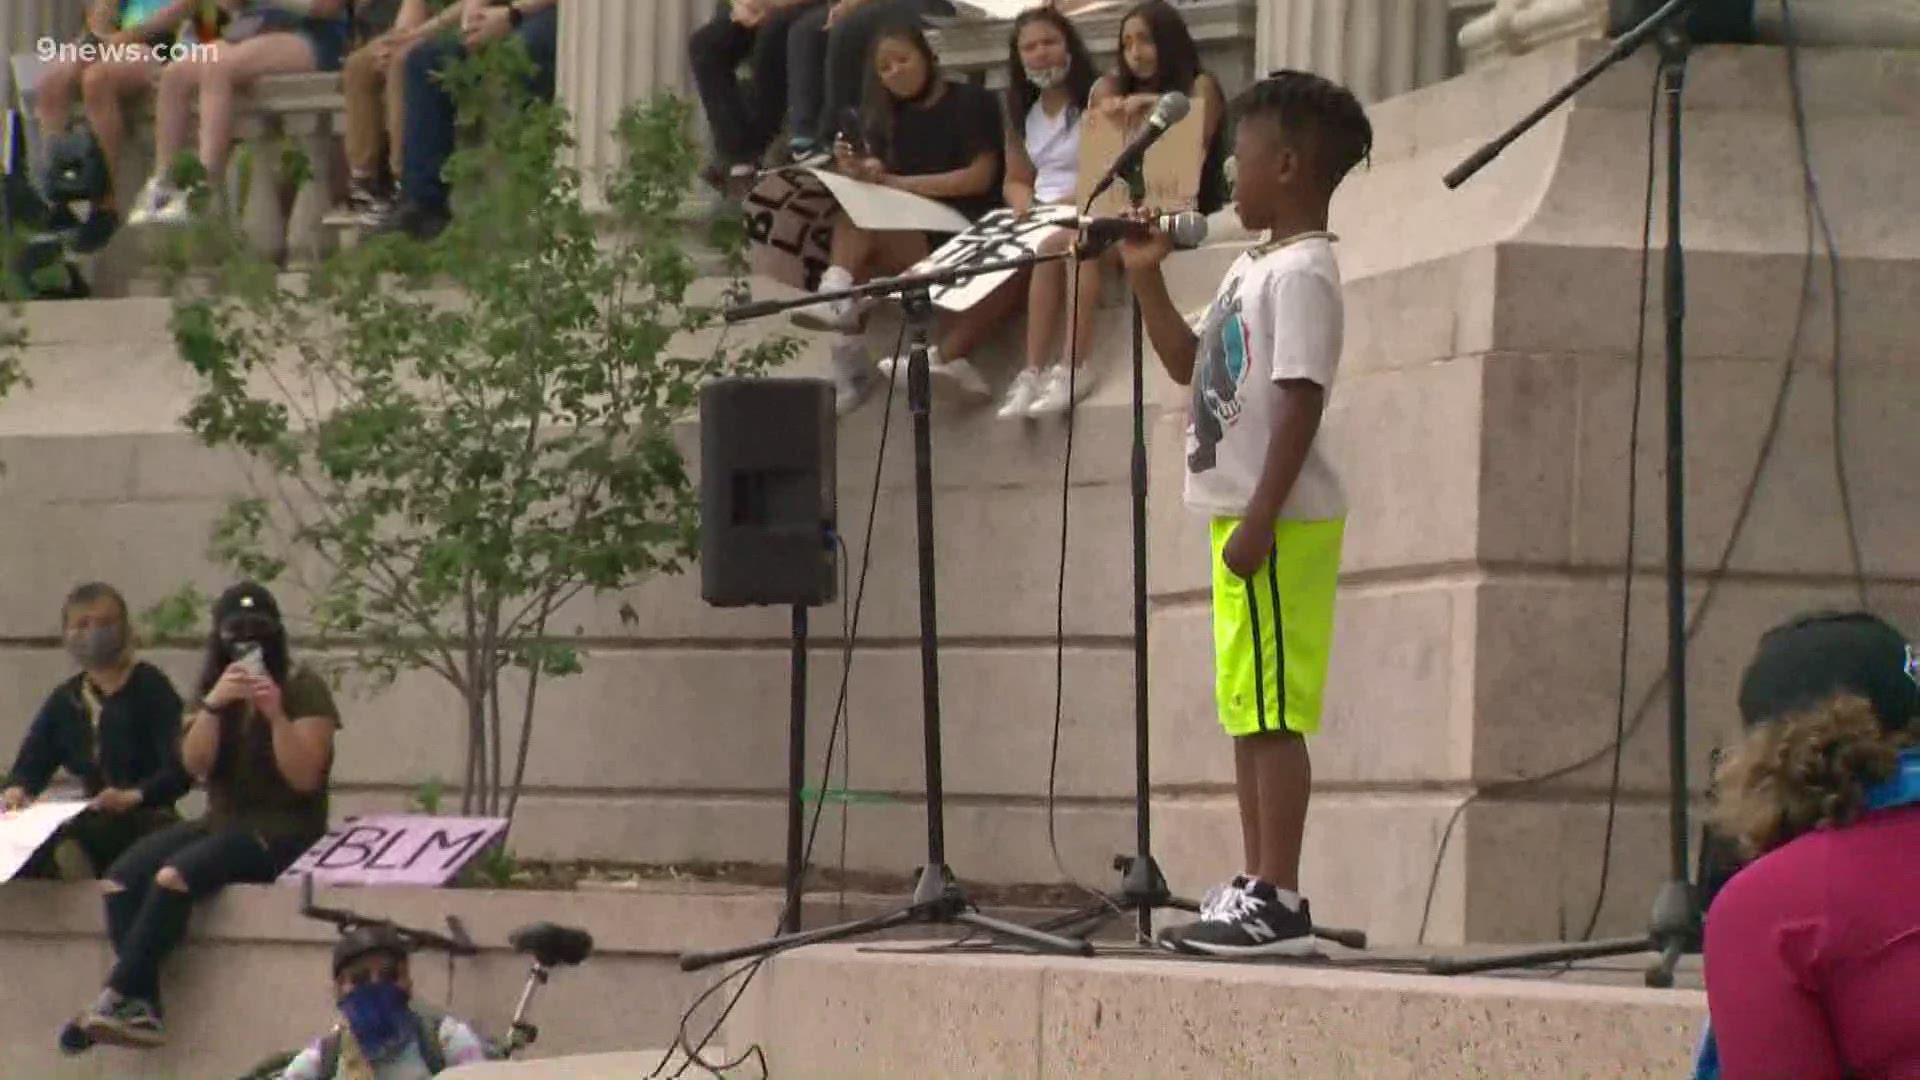 Today, kids got a chance to speak to protesters in Denver.